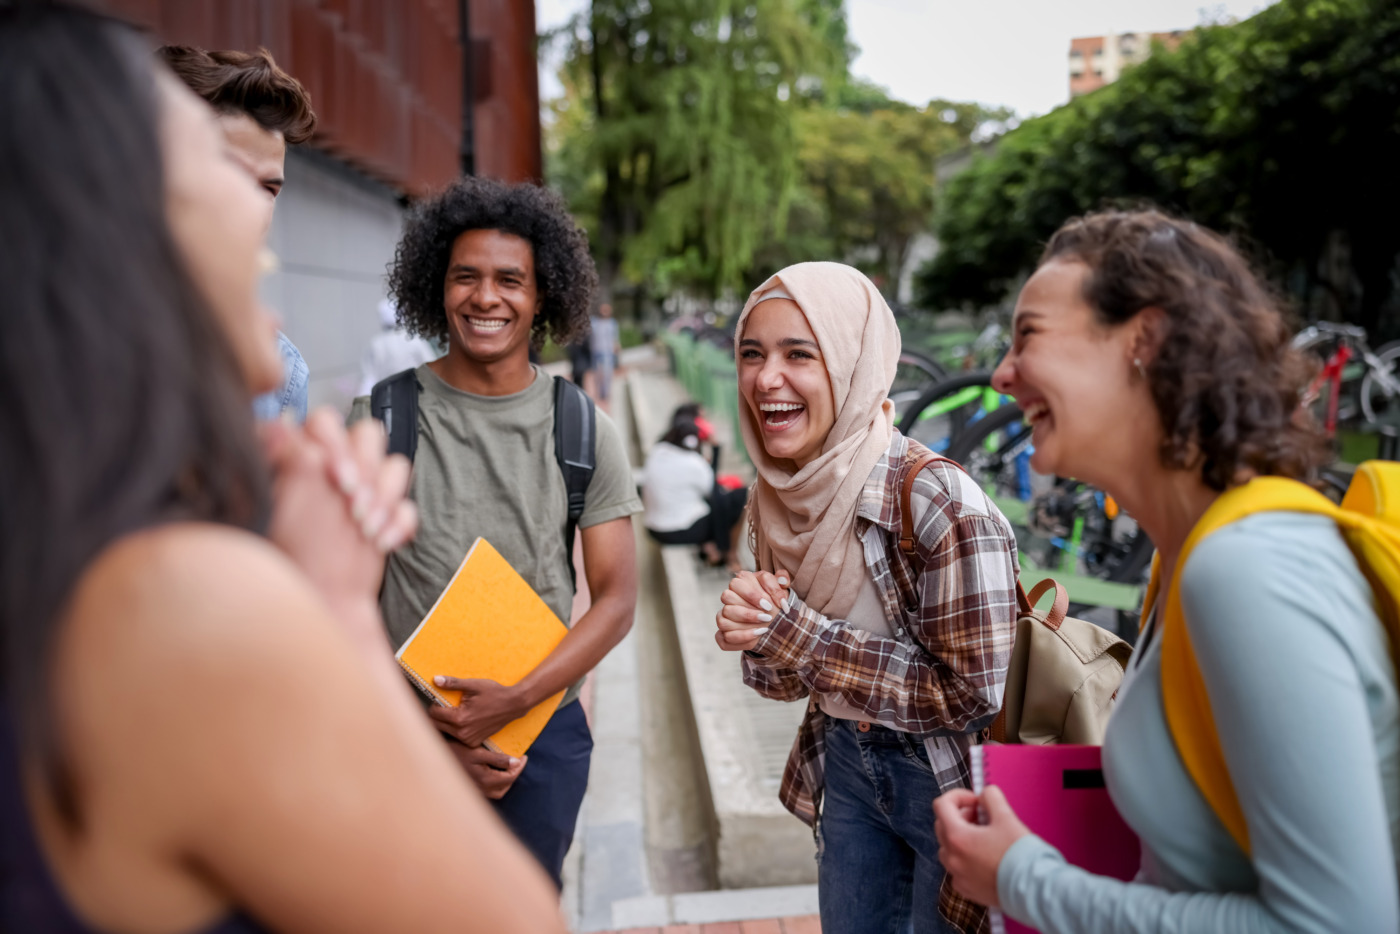 Group of young people at university laughing